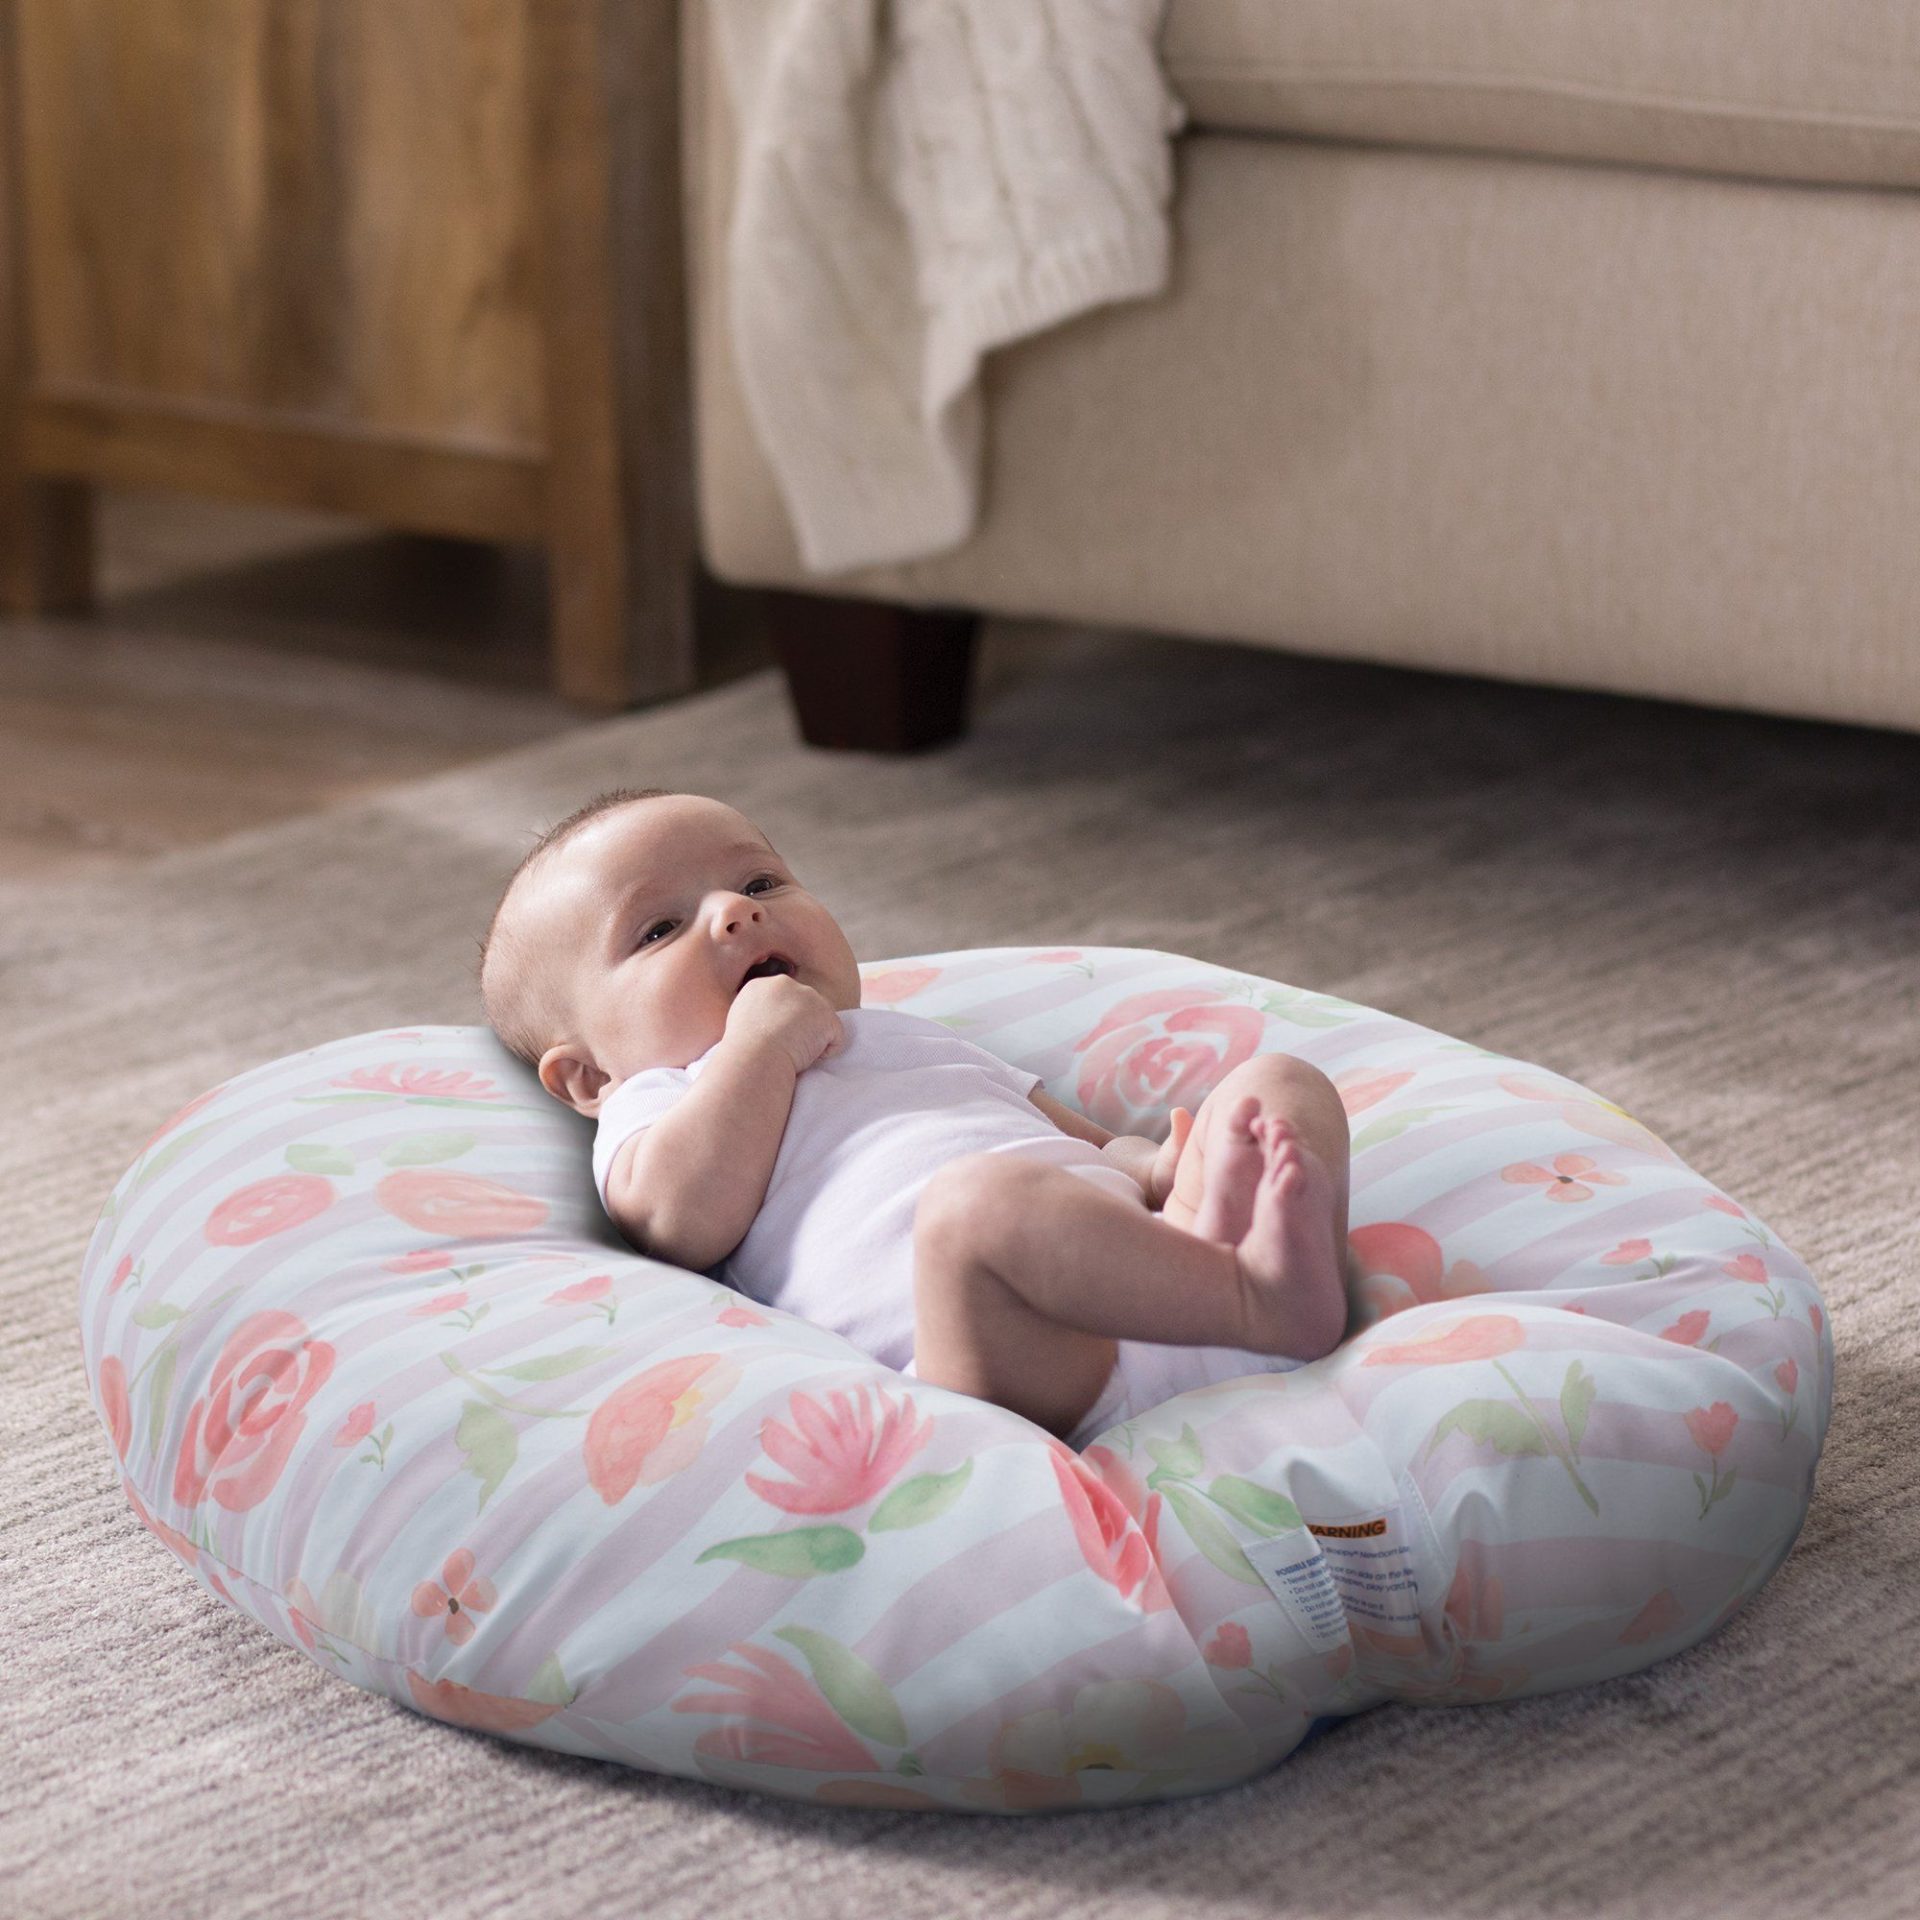 The CPSC Will Now Ban Certain Sleep Related Baby Products